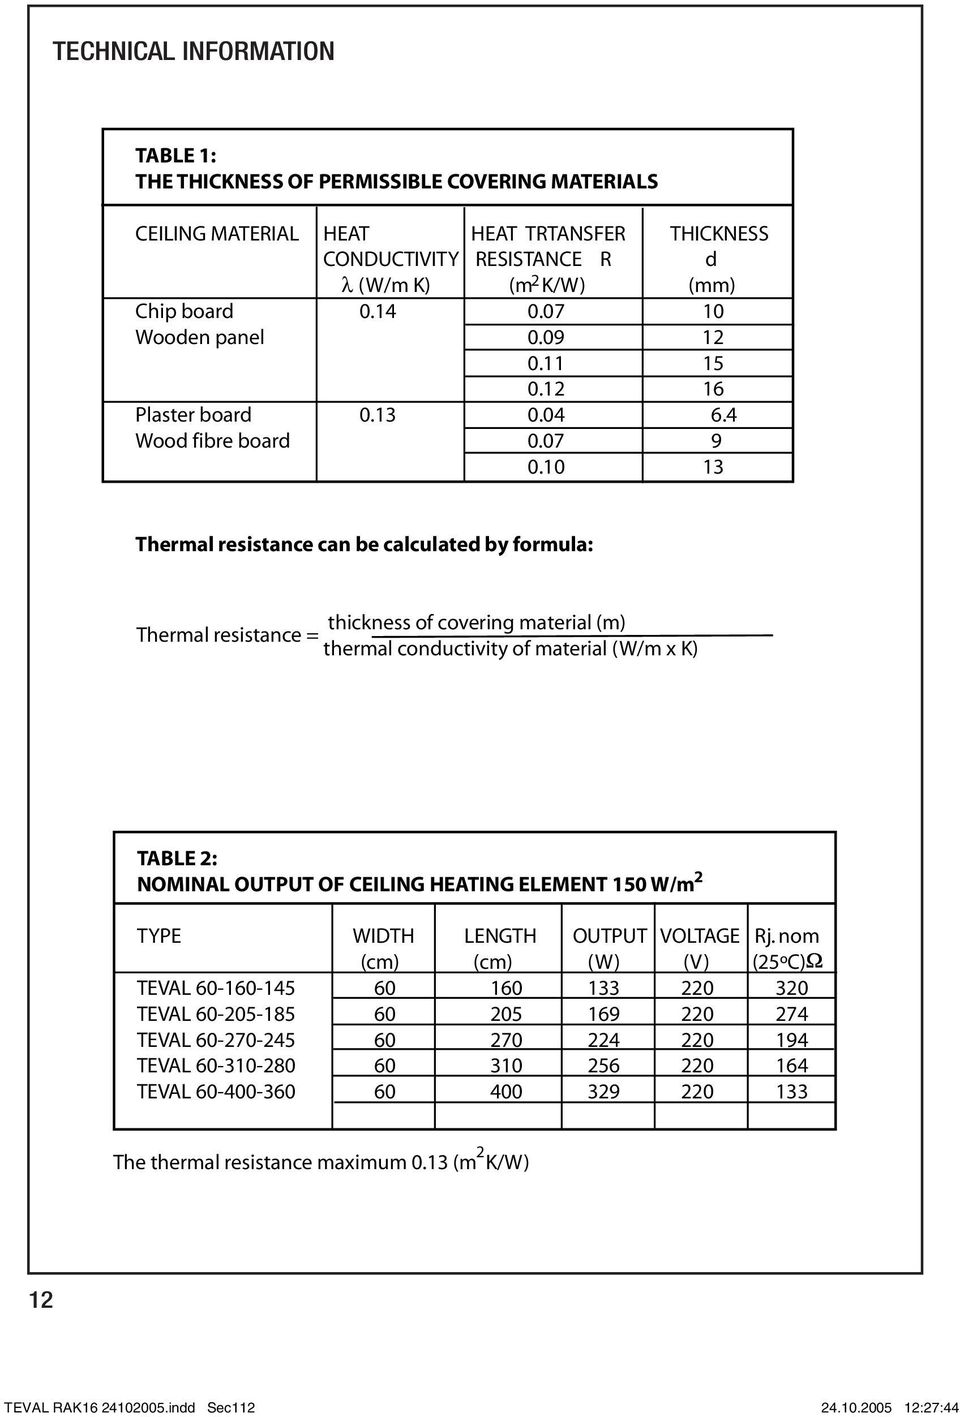 10 13 Thermal resistance can be calculated by formula: thickness of covering material (m) Thermal resistance = thermal conductivity of material (W/m x K) TABLE 2: 2 NOMINAL OUTPUT OF CEILING HEATING